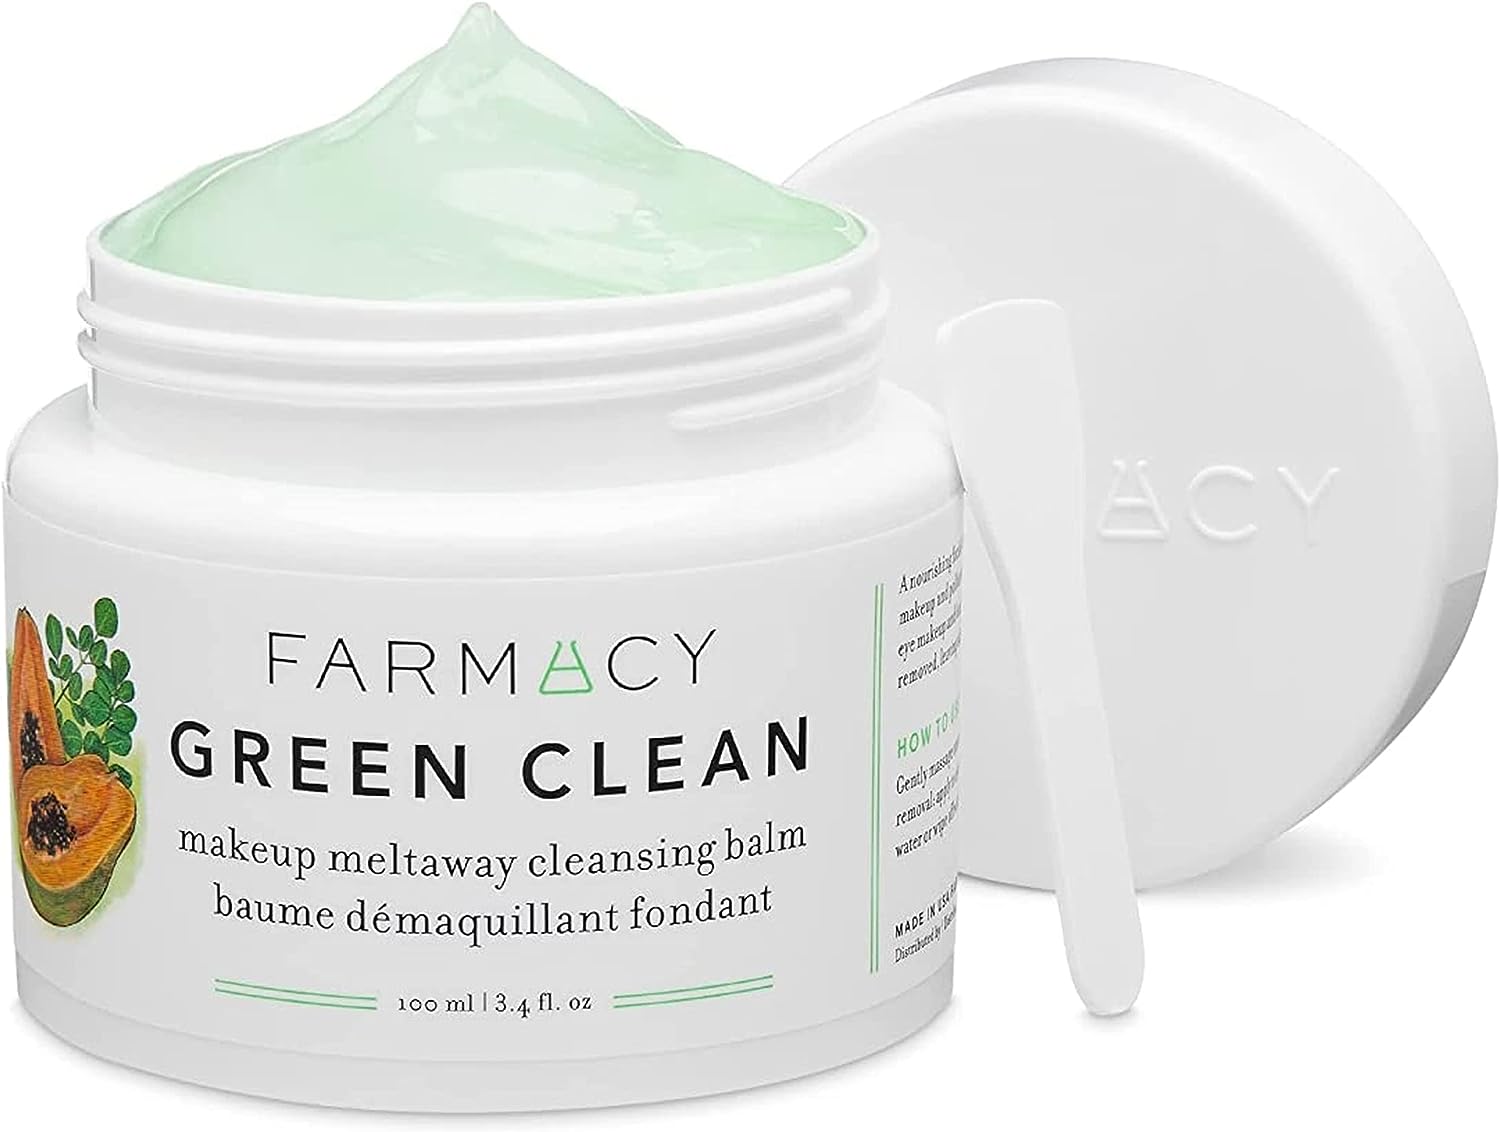 Farmacy Natural Makeup Remover - Green Clean Makeup Meltaway Cleansing Balm Cosmetic